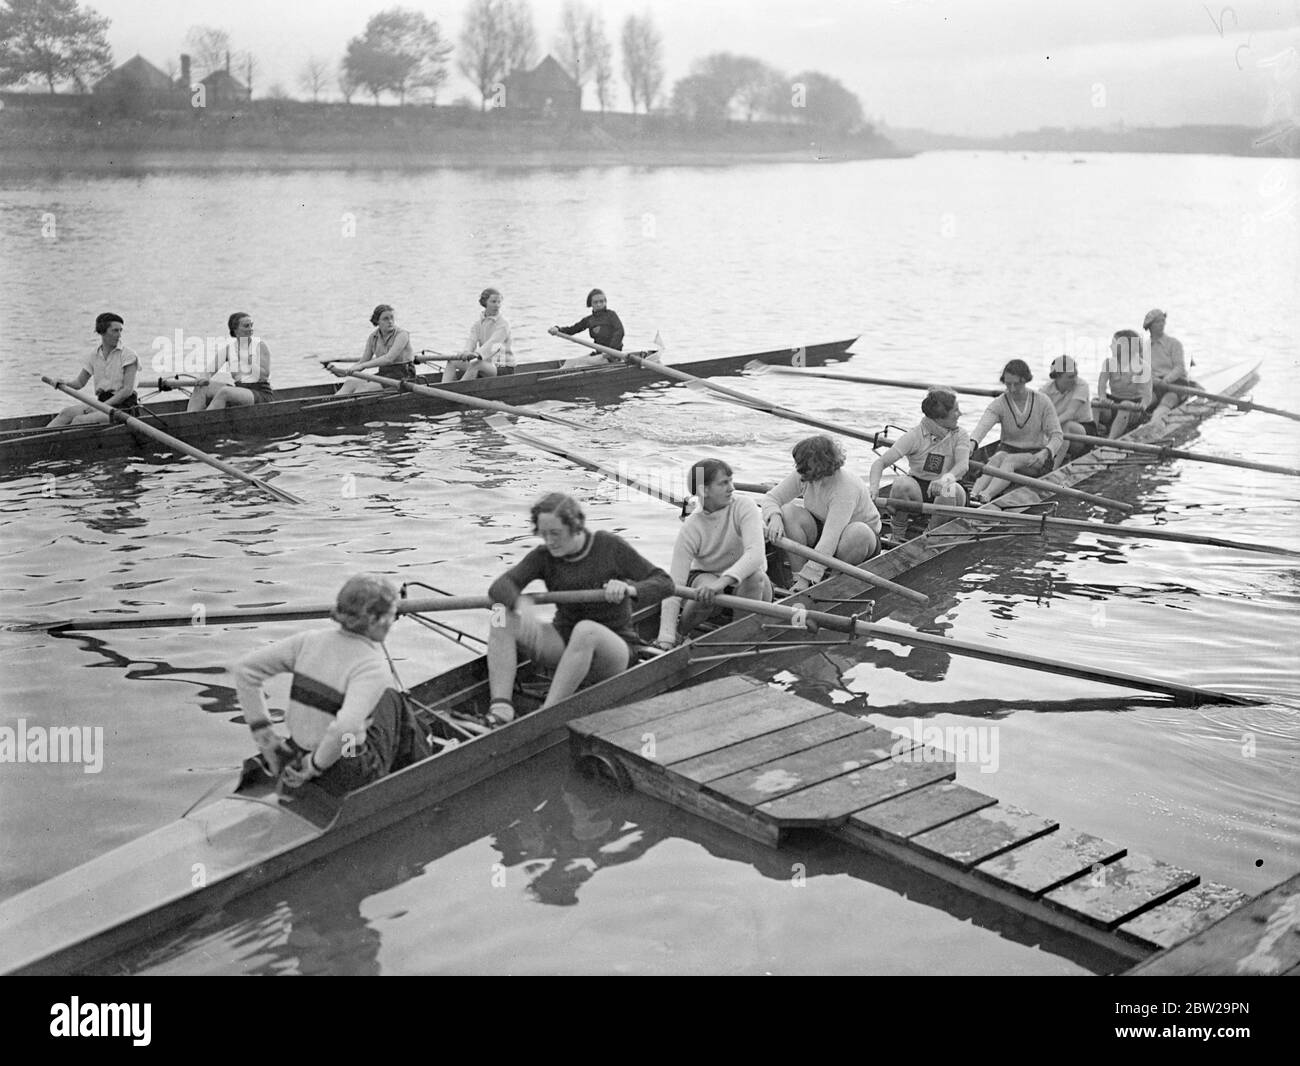 Roaring girl's regatta on the Thames. The annual Invitation Regatta of the Lyons Ladies Rowing Club took place on the Thames at Hammersmith, London. Photo shows, to the crews pushing off for the start of a race. 30 October 1937 Stock Photo